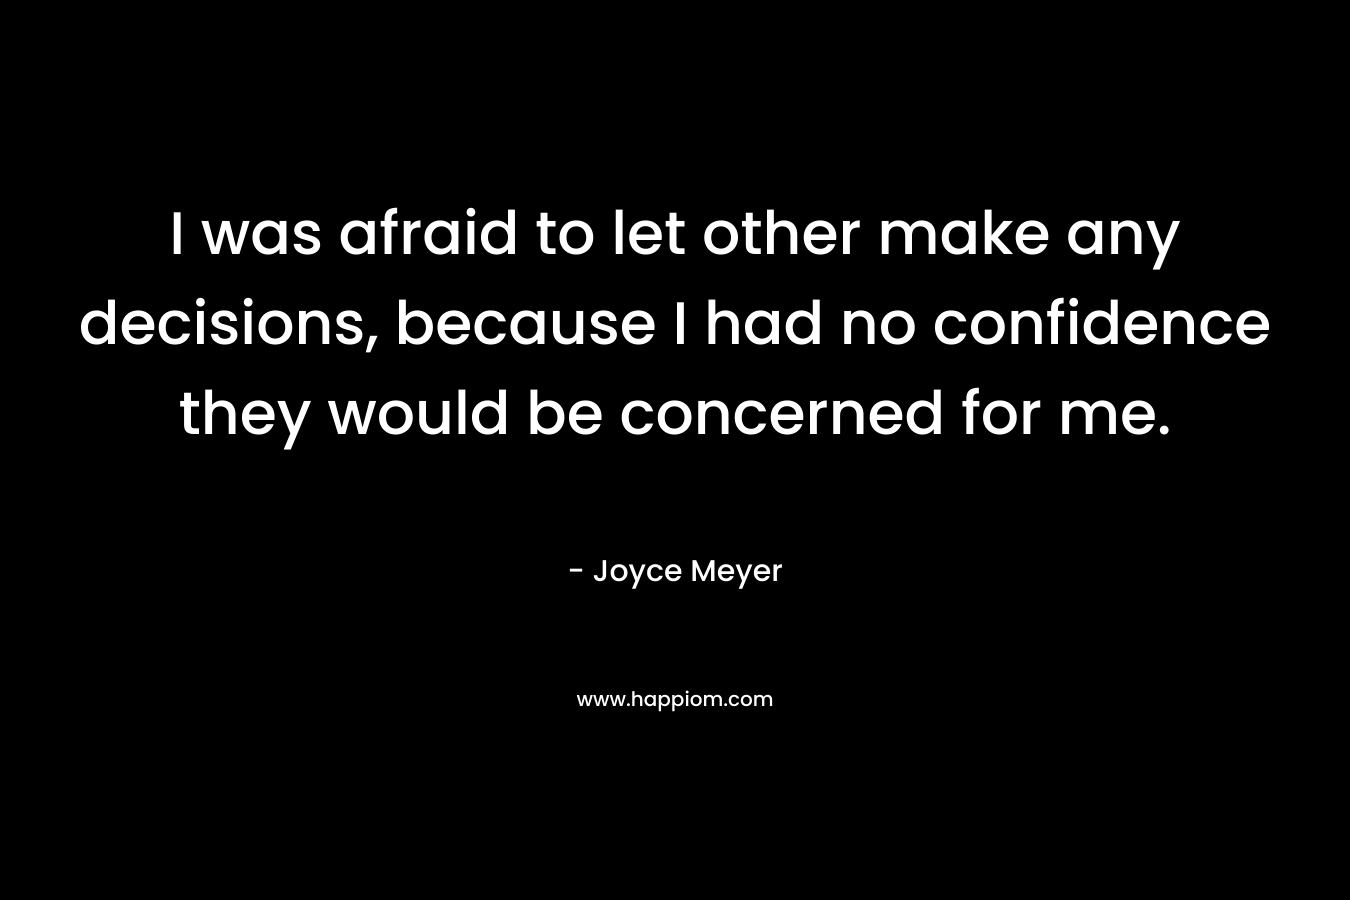 I was afraid to let other make any decisions, because I had no confidence they would be concerned for me. – Joyce Meyer